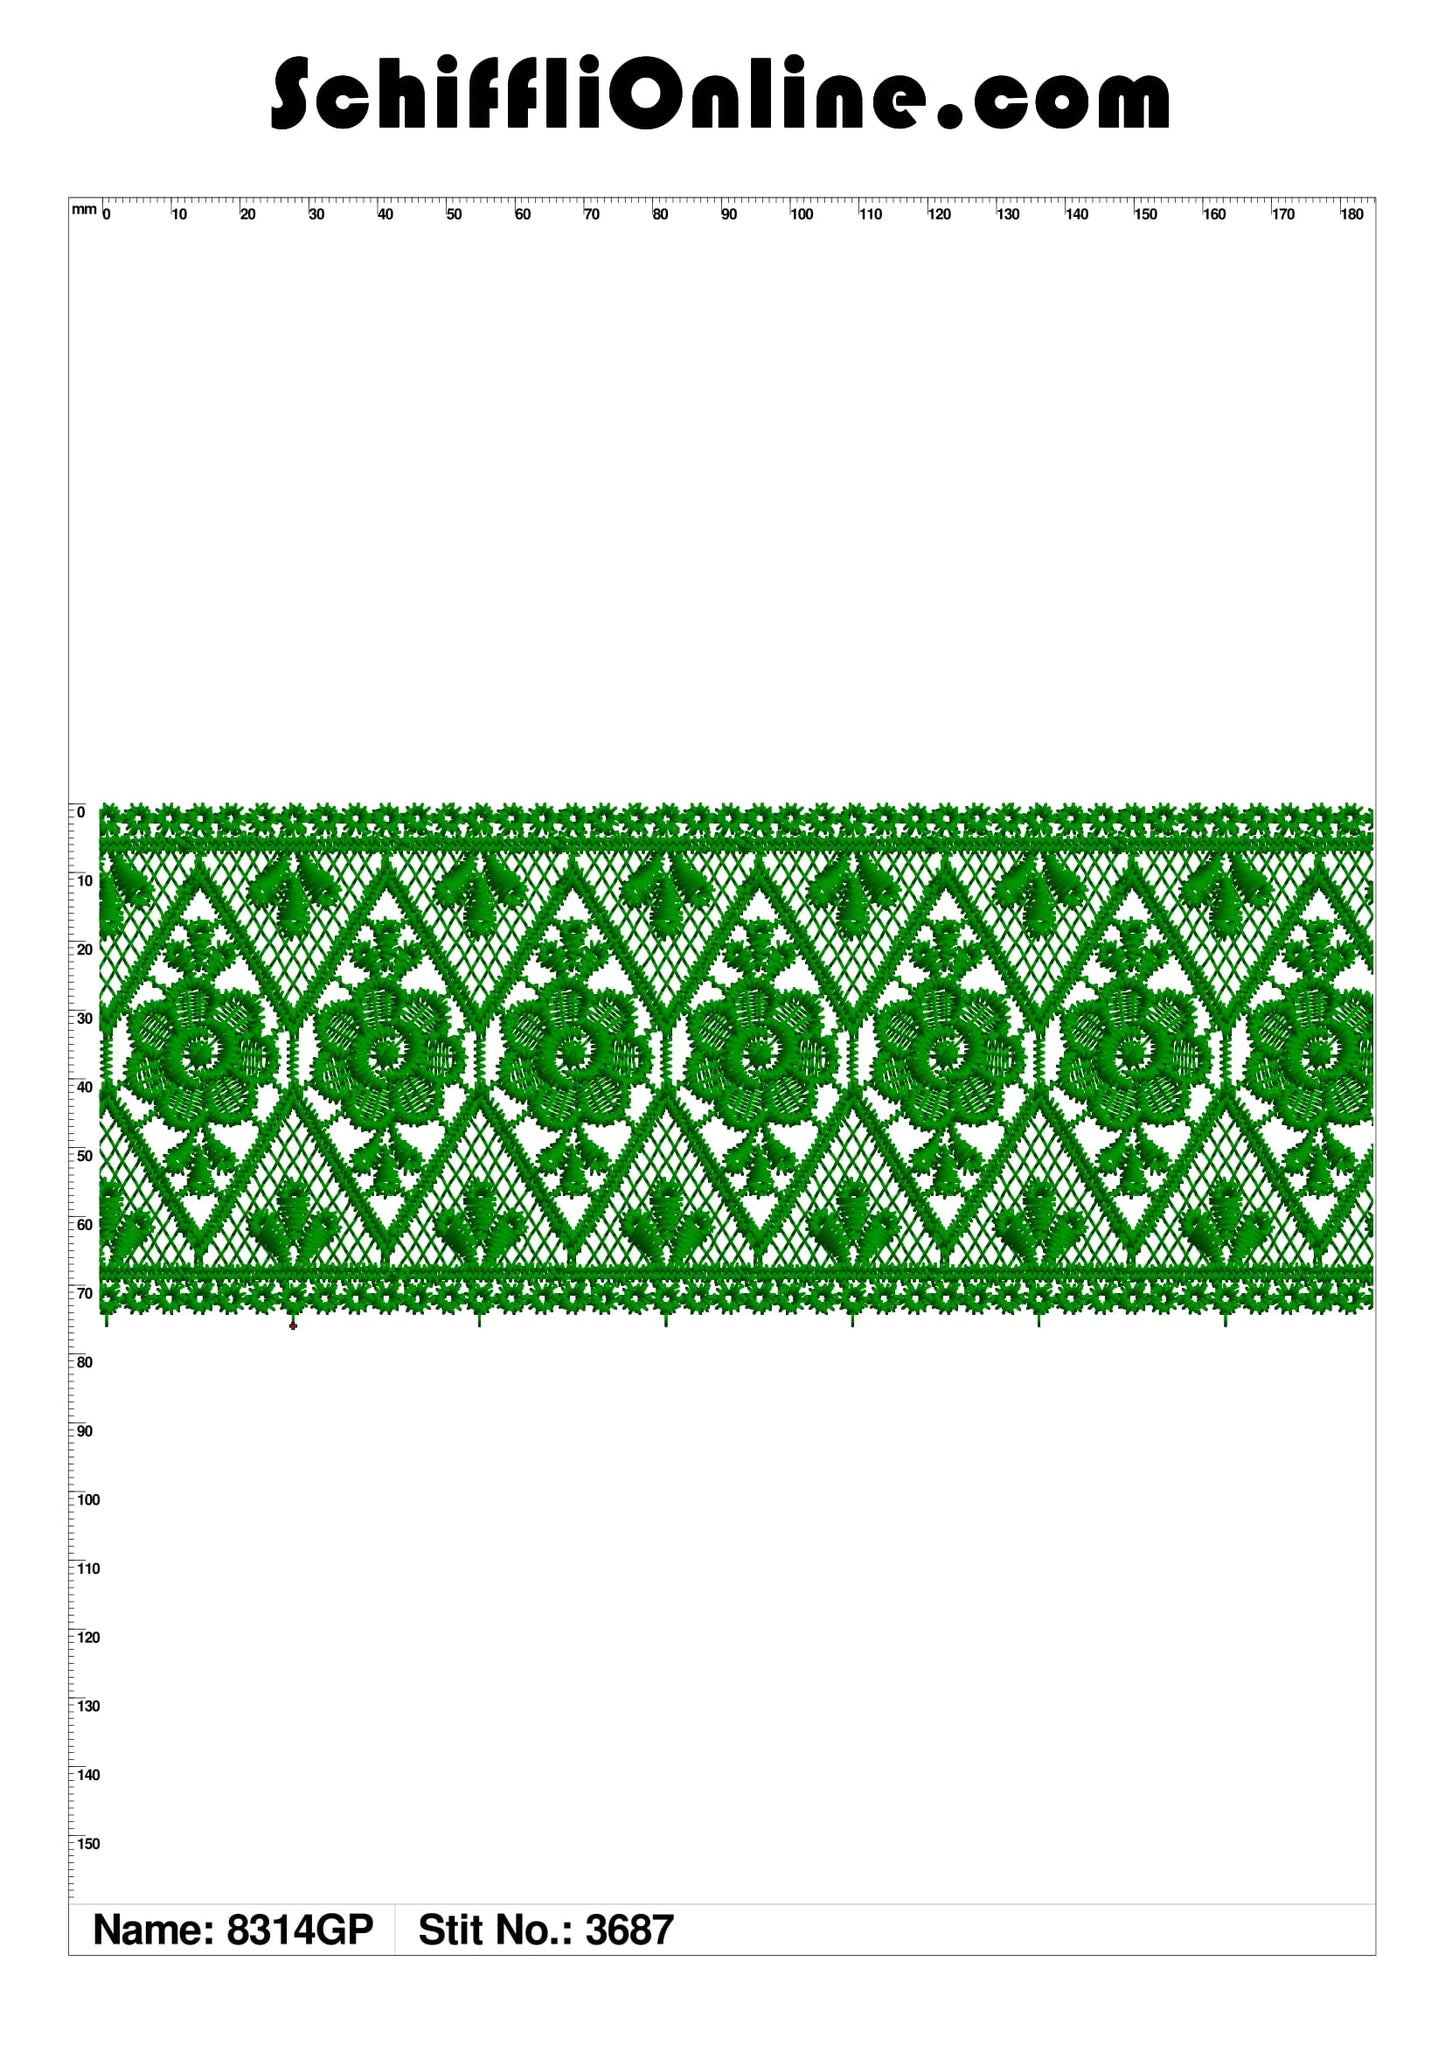 Book 172 CHEMICAL LACE 4X4 50 DESIGNS